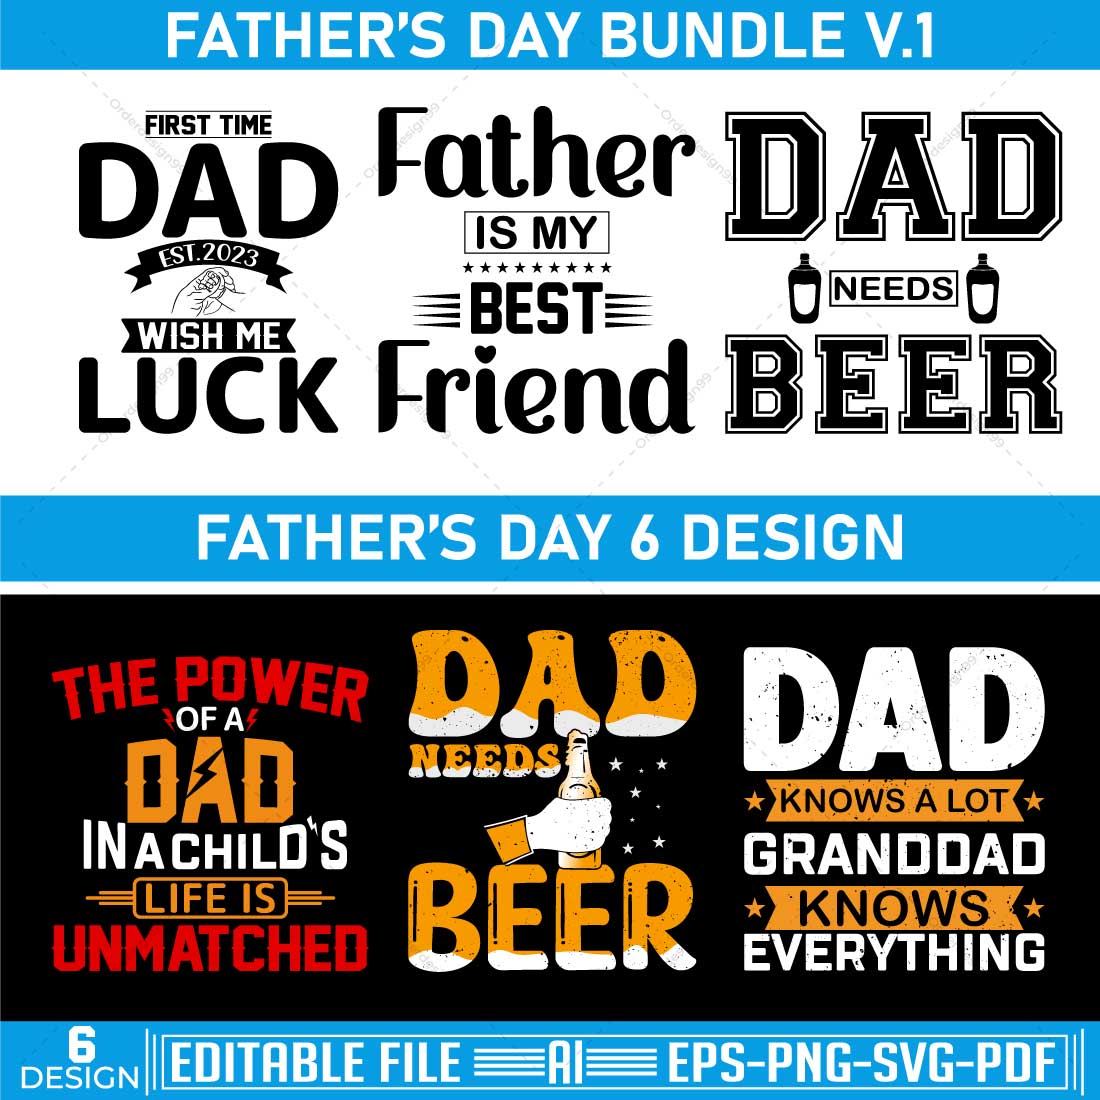 Father's Day T-shirt Bundle V1 cover image.